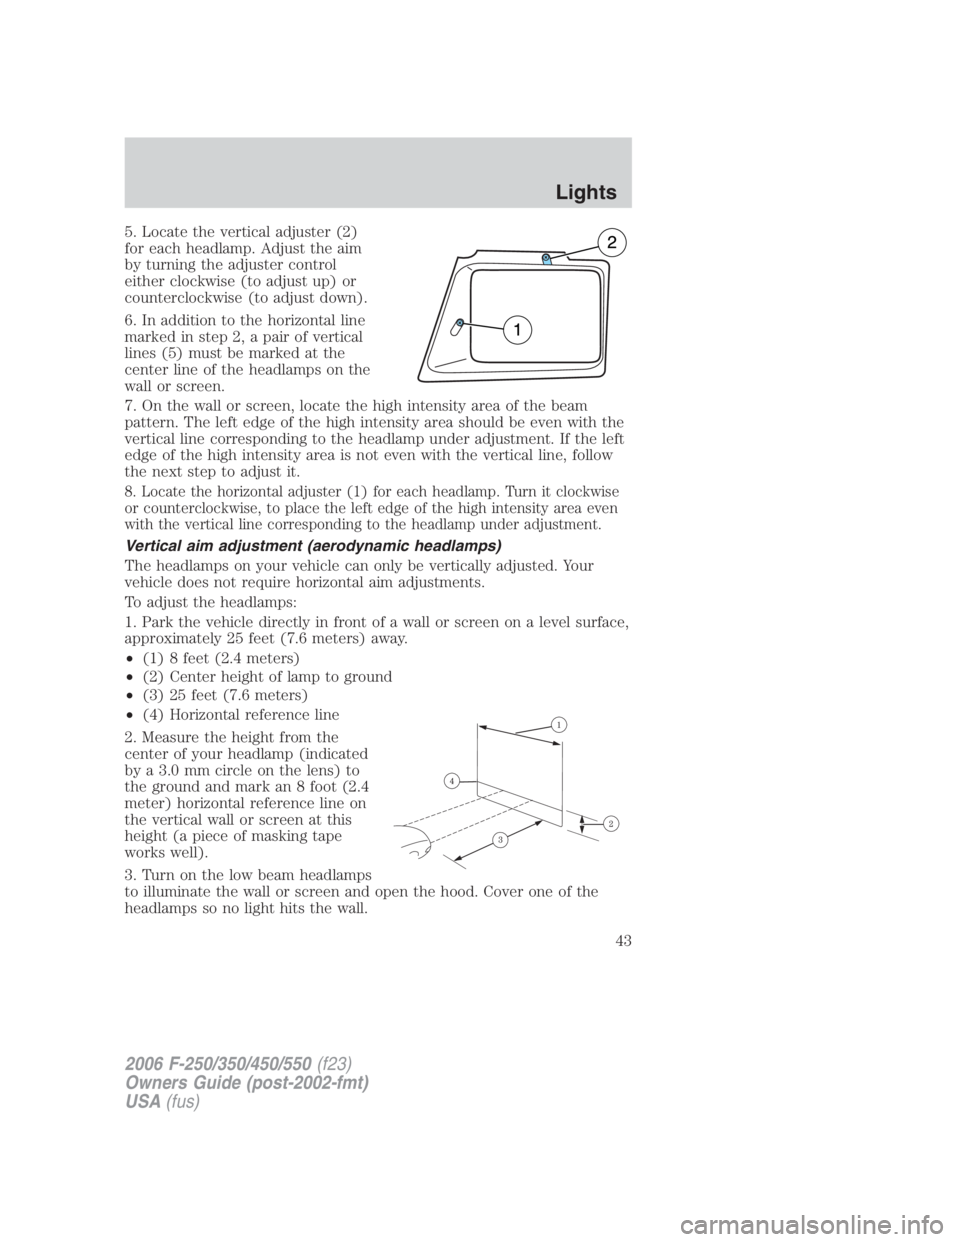 FORD F250 SUPER DUTY 2006  Owners Manual 5. Locate the vertical adjuster (2)
for each headlamp. Adjust the aim
by turning the adjuster control
either clockwise (to adjust up) or
counterclockwise (to adjust down).
6. In addition to the horizo